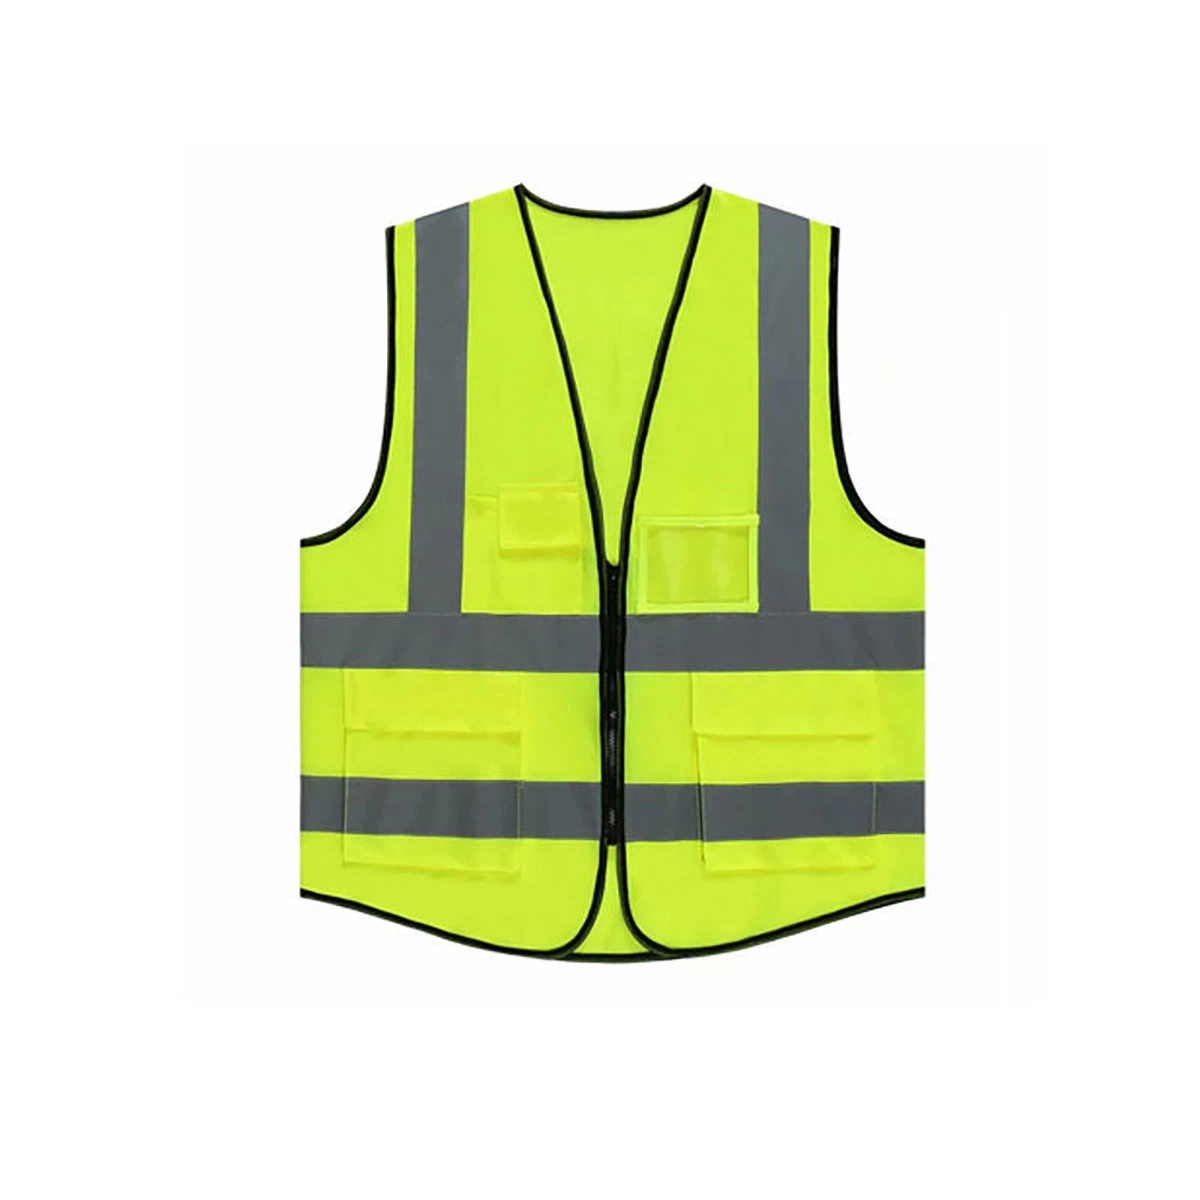 2022 Tekway Custom High Visibility Reflective Safety T Shirt Construction Reflective Vests Reflective Clothing Material